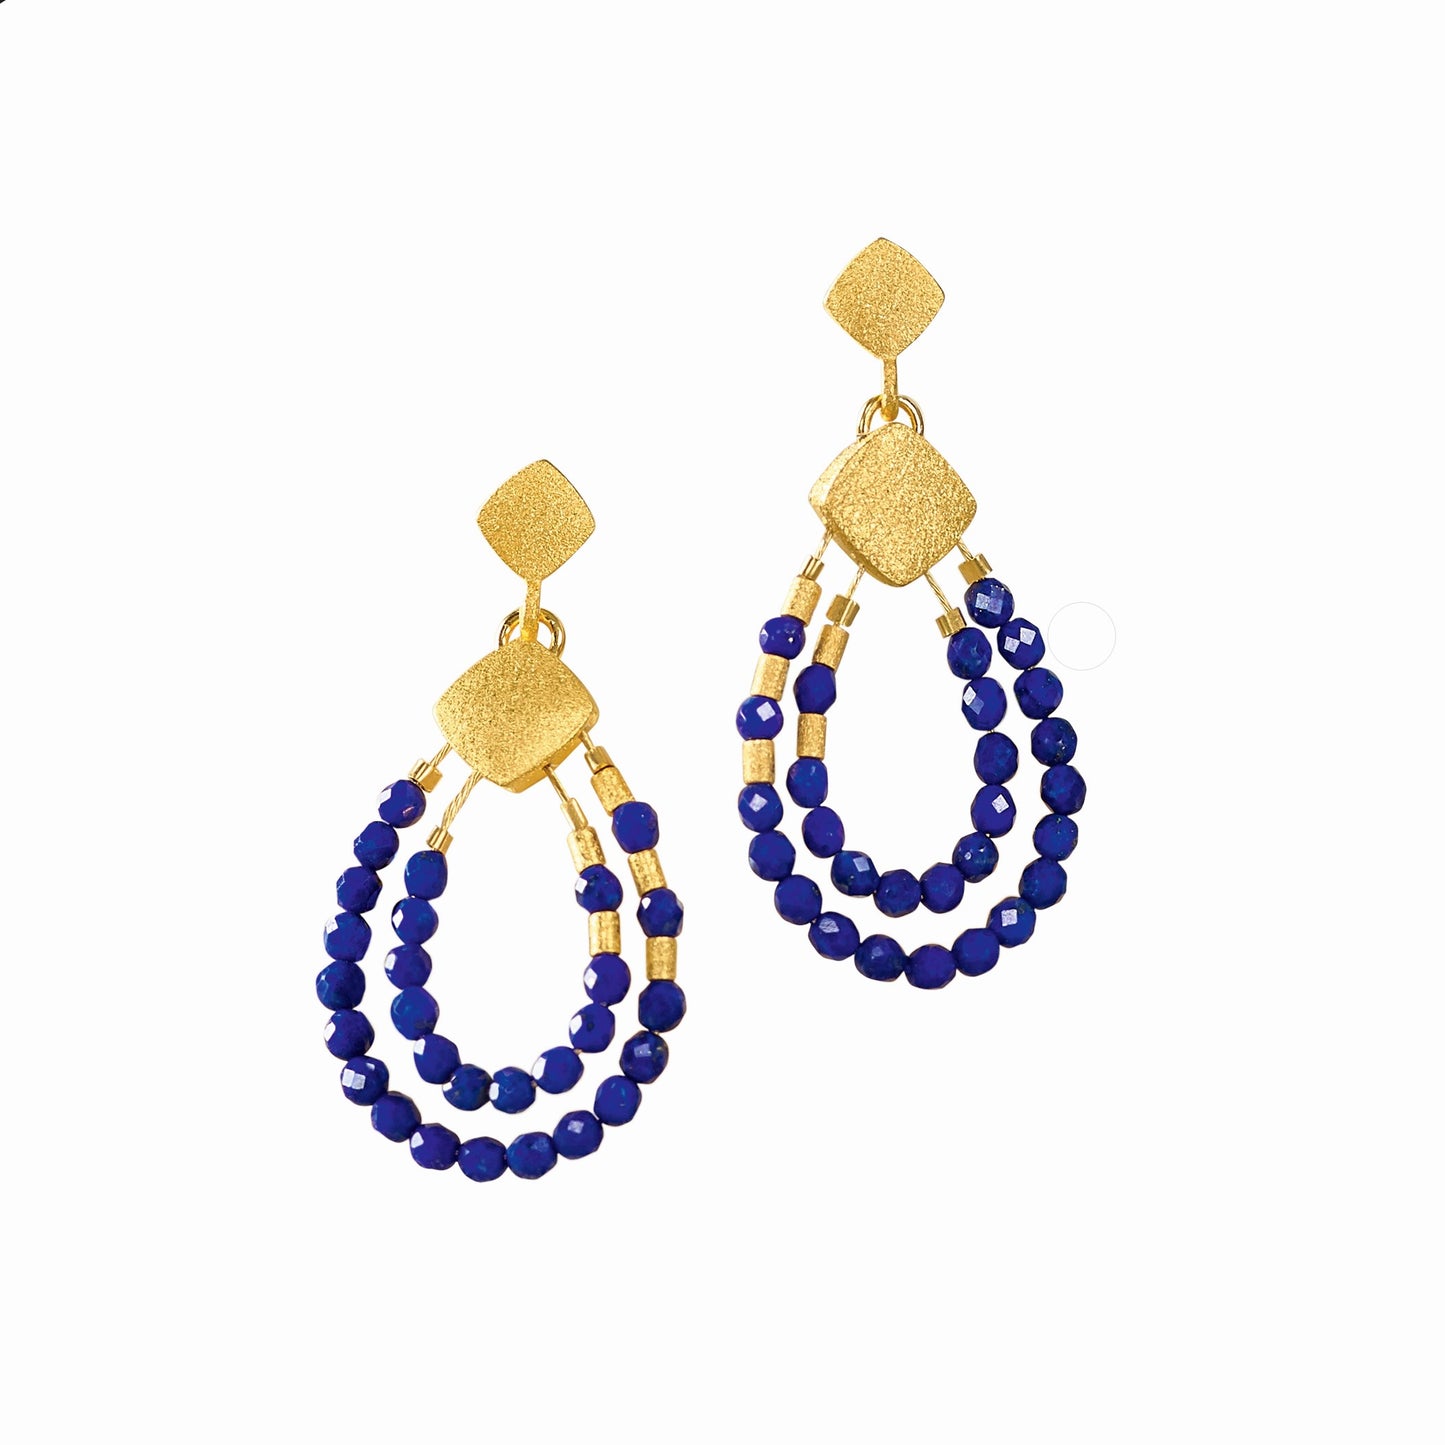 Bernd Wolf Collection "Climini" Lapis Earrings